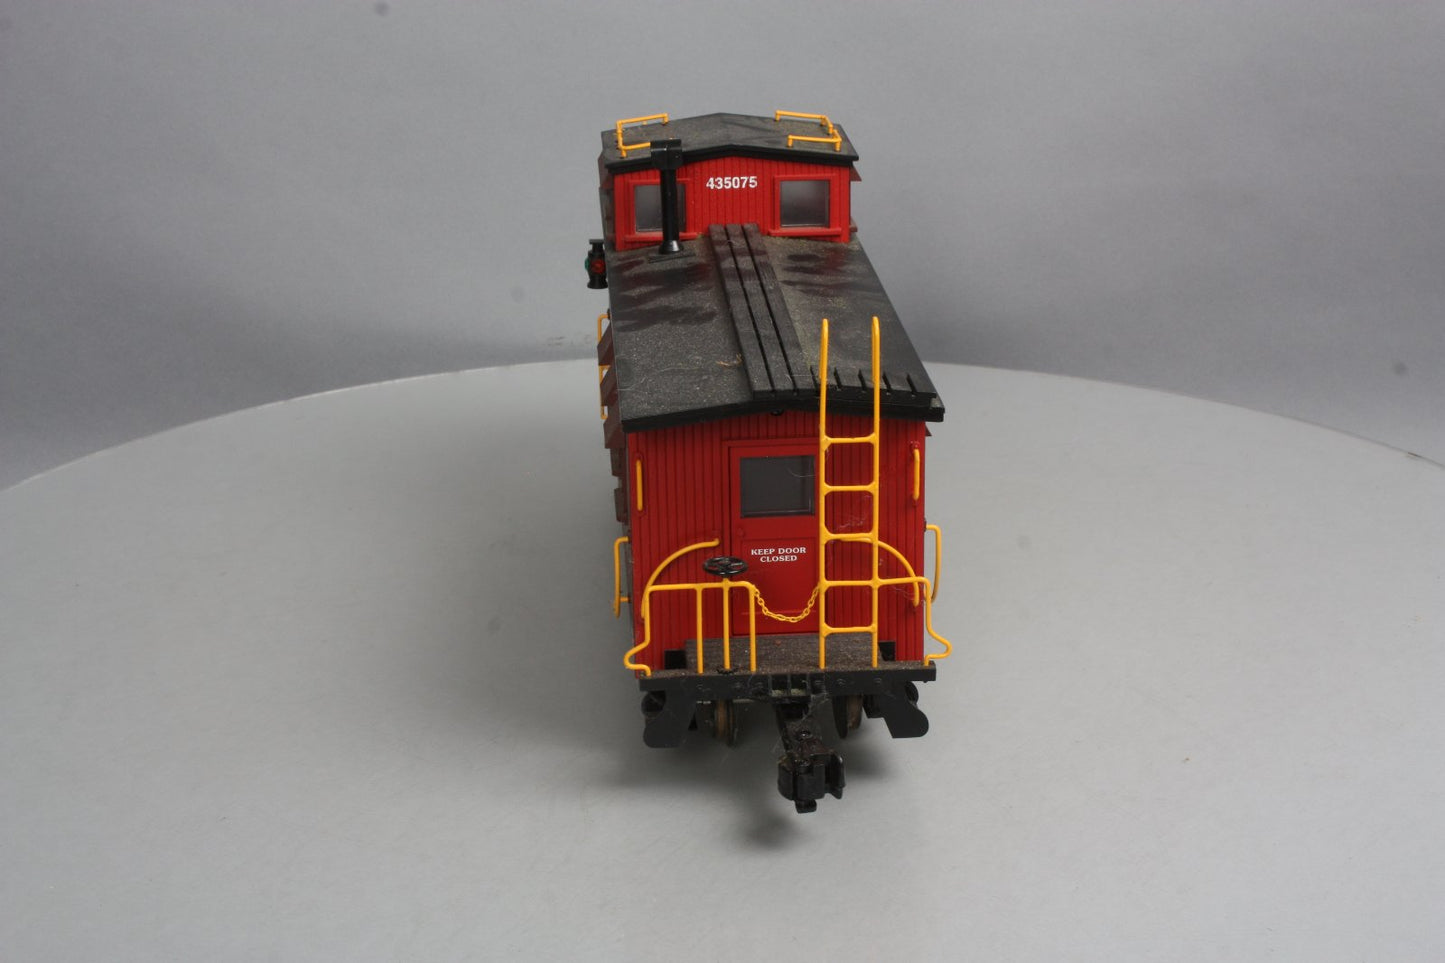 USA Trains R12023 Canadian Pacific Caboose - Metal Wheels